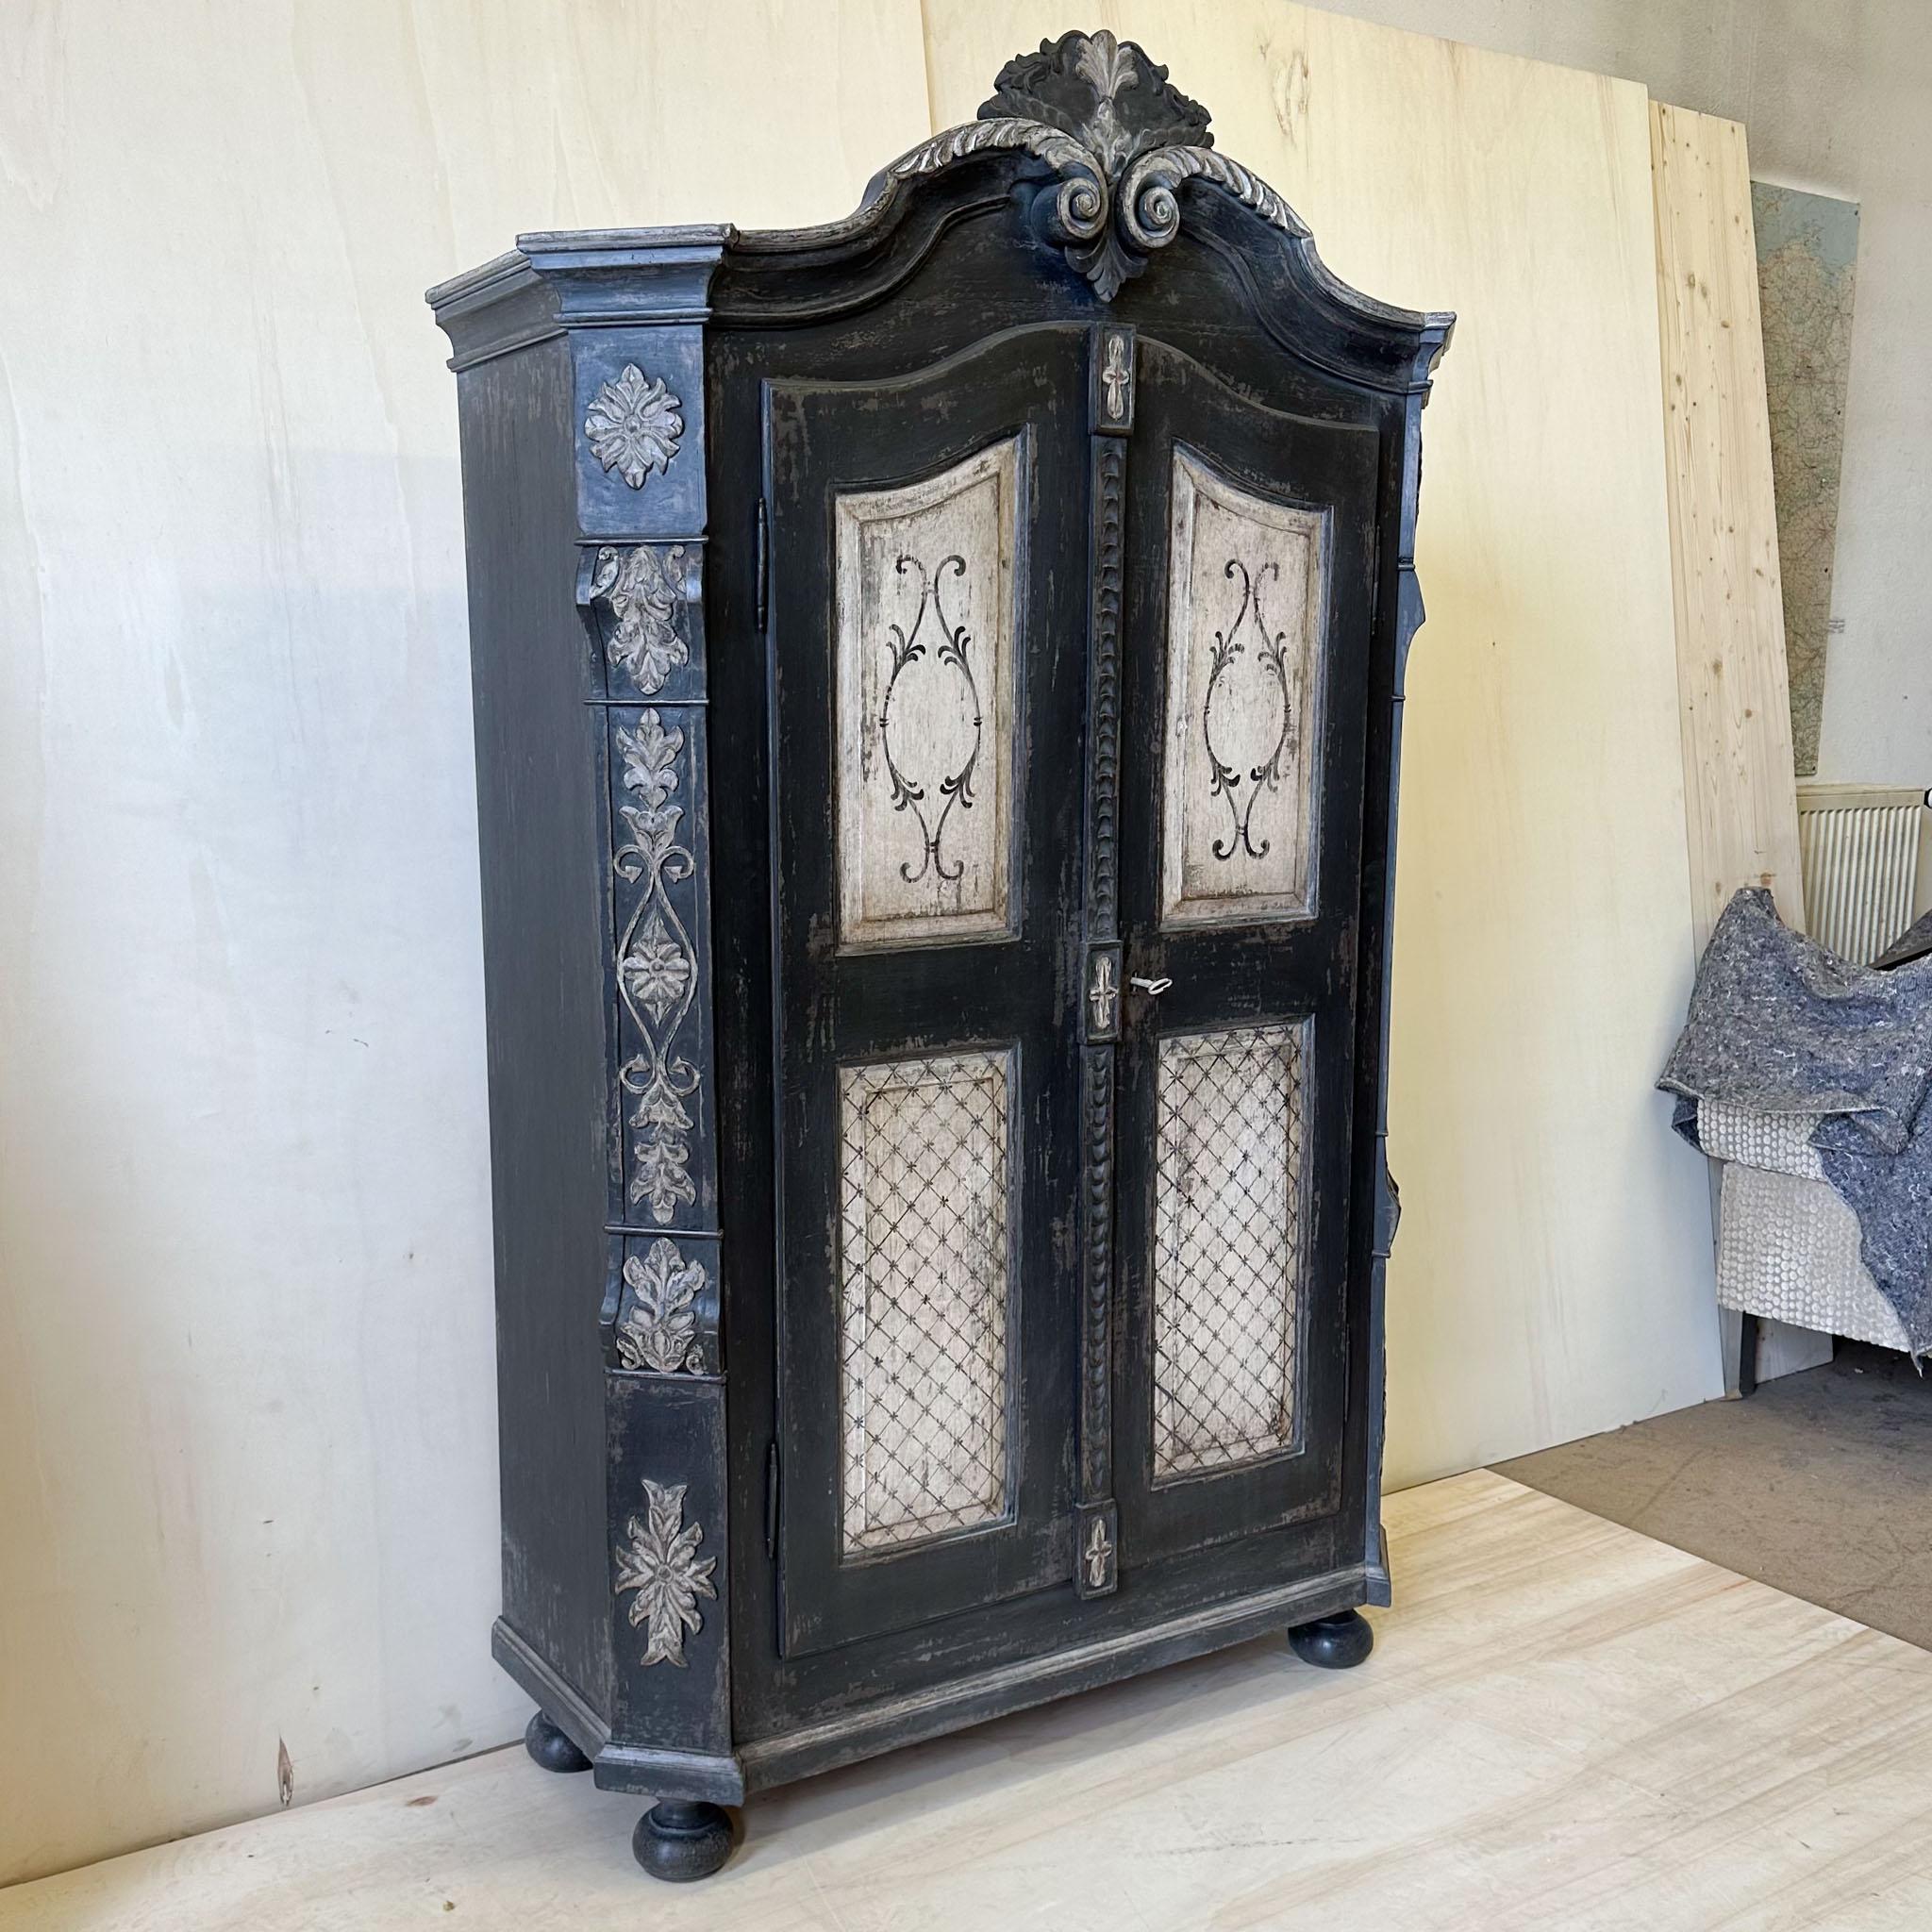 Hand painted two-door cabinet with curved pediment and bevelled corners with carved decoration. The frame in light and dark grey is new and has been decoratively patinated.